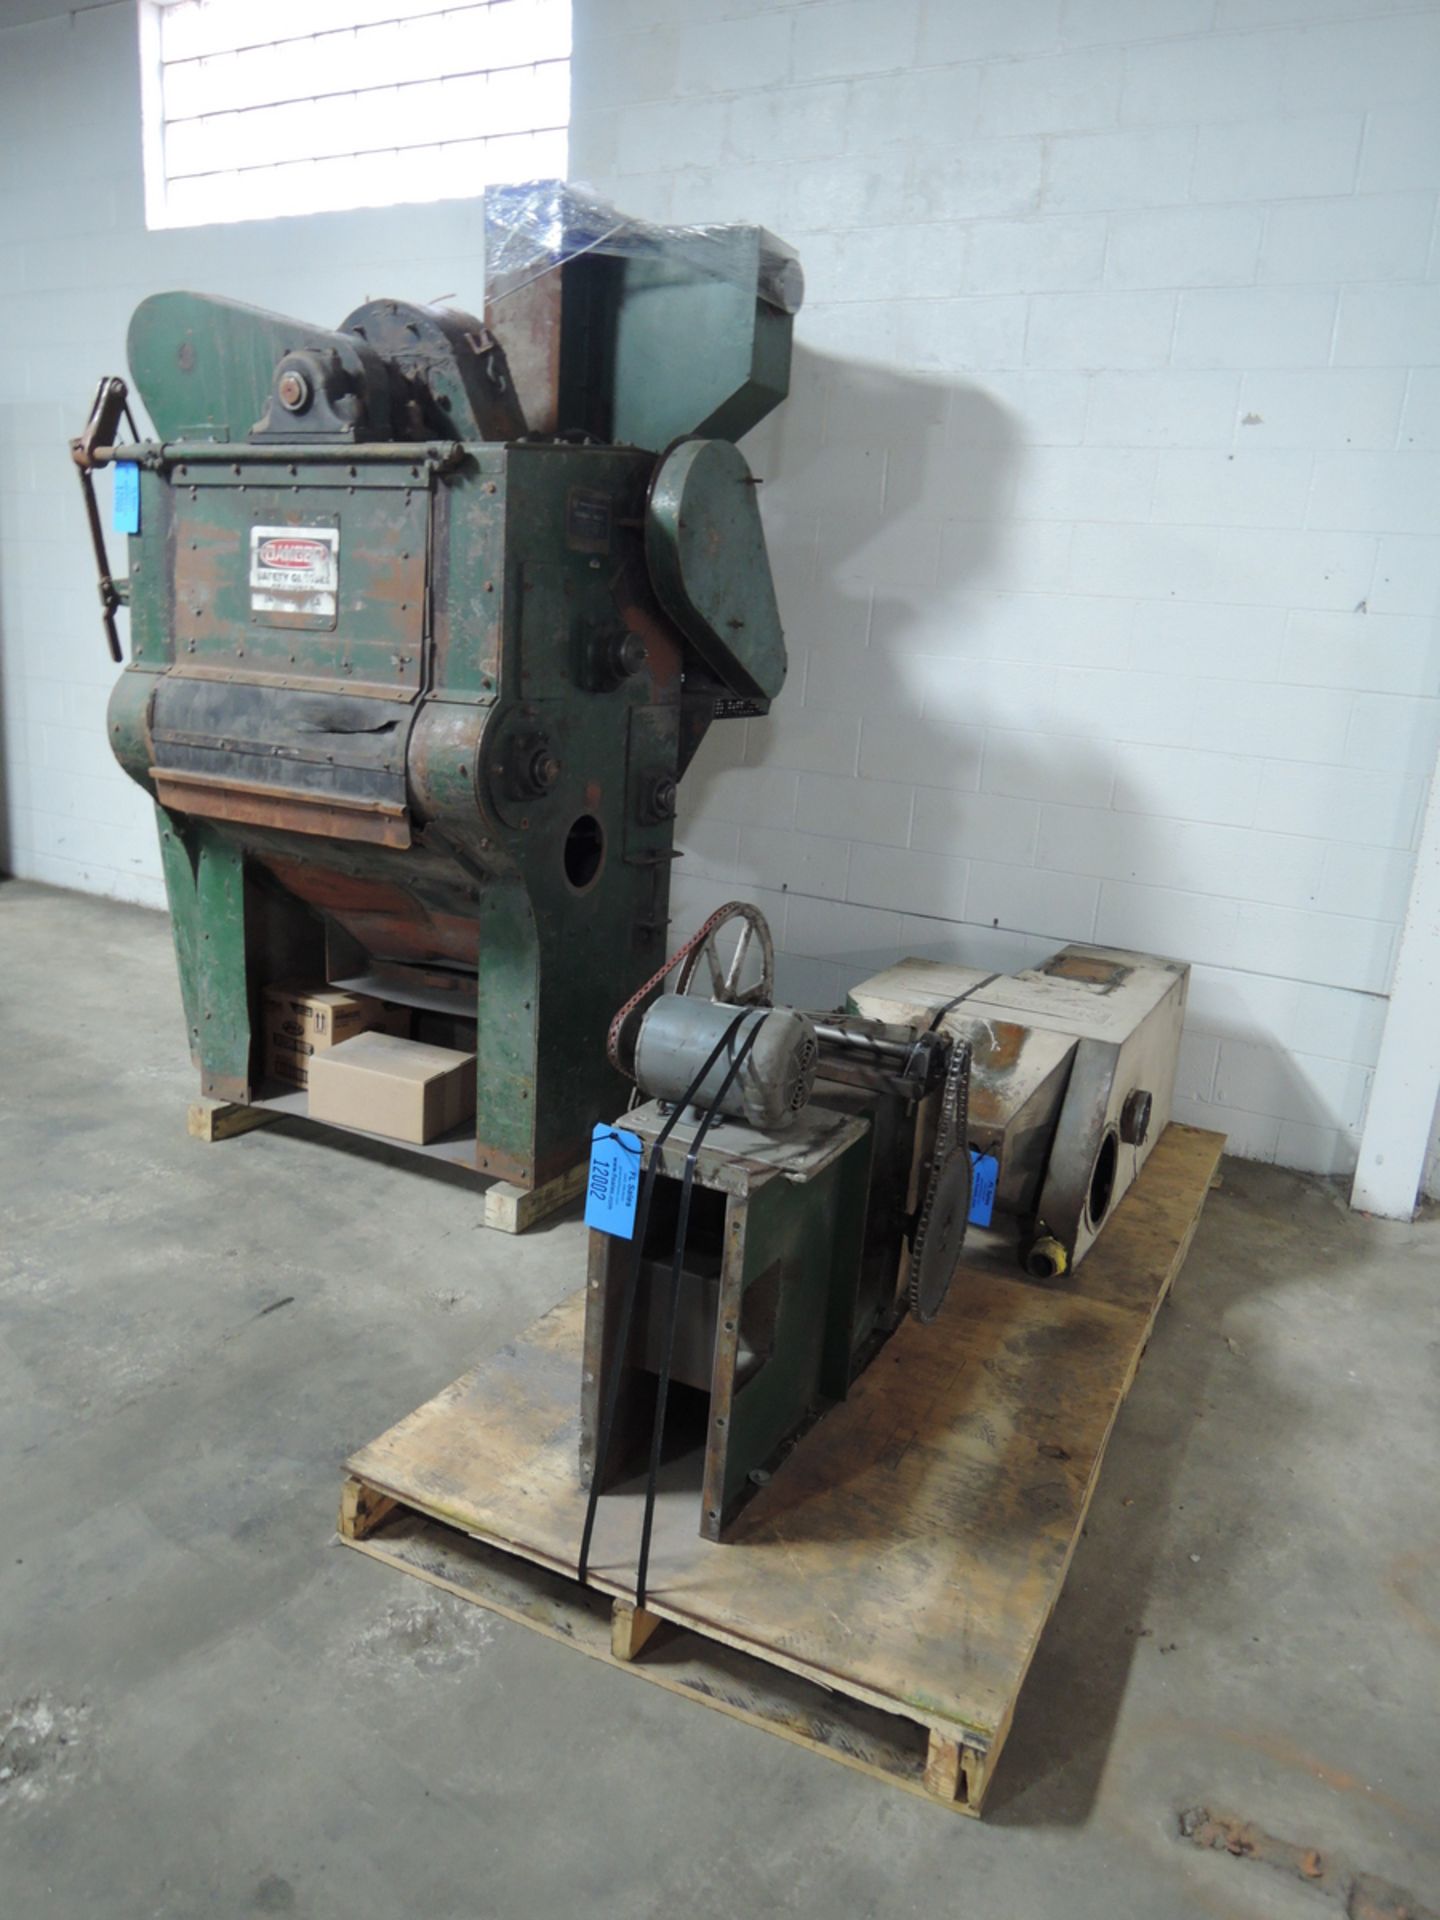 WHEELABRATOR 20 X 27 RUBBER BELT BLAST MACHINE S/N A122253, 5HP, 230/460 VOLTS WITH SEPERATOR AND